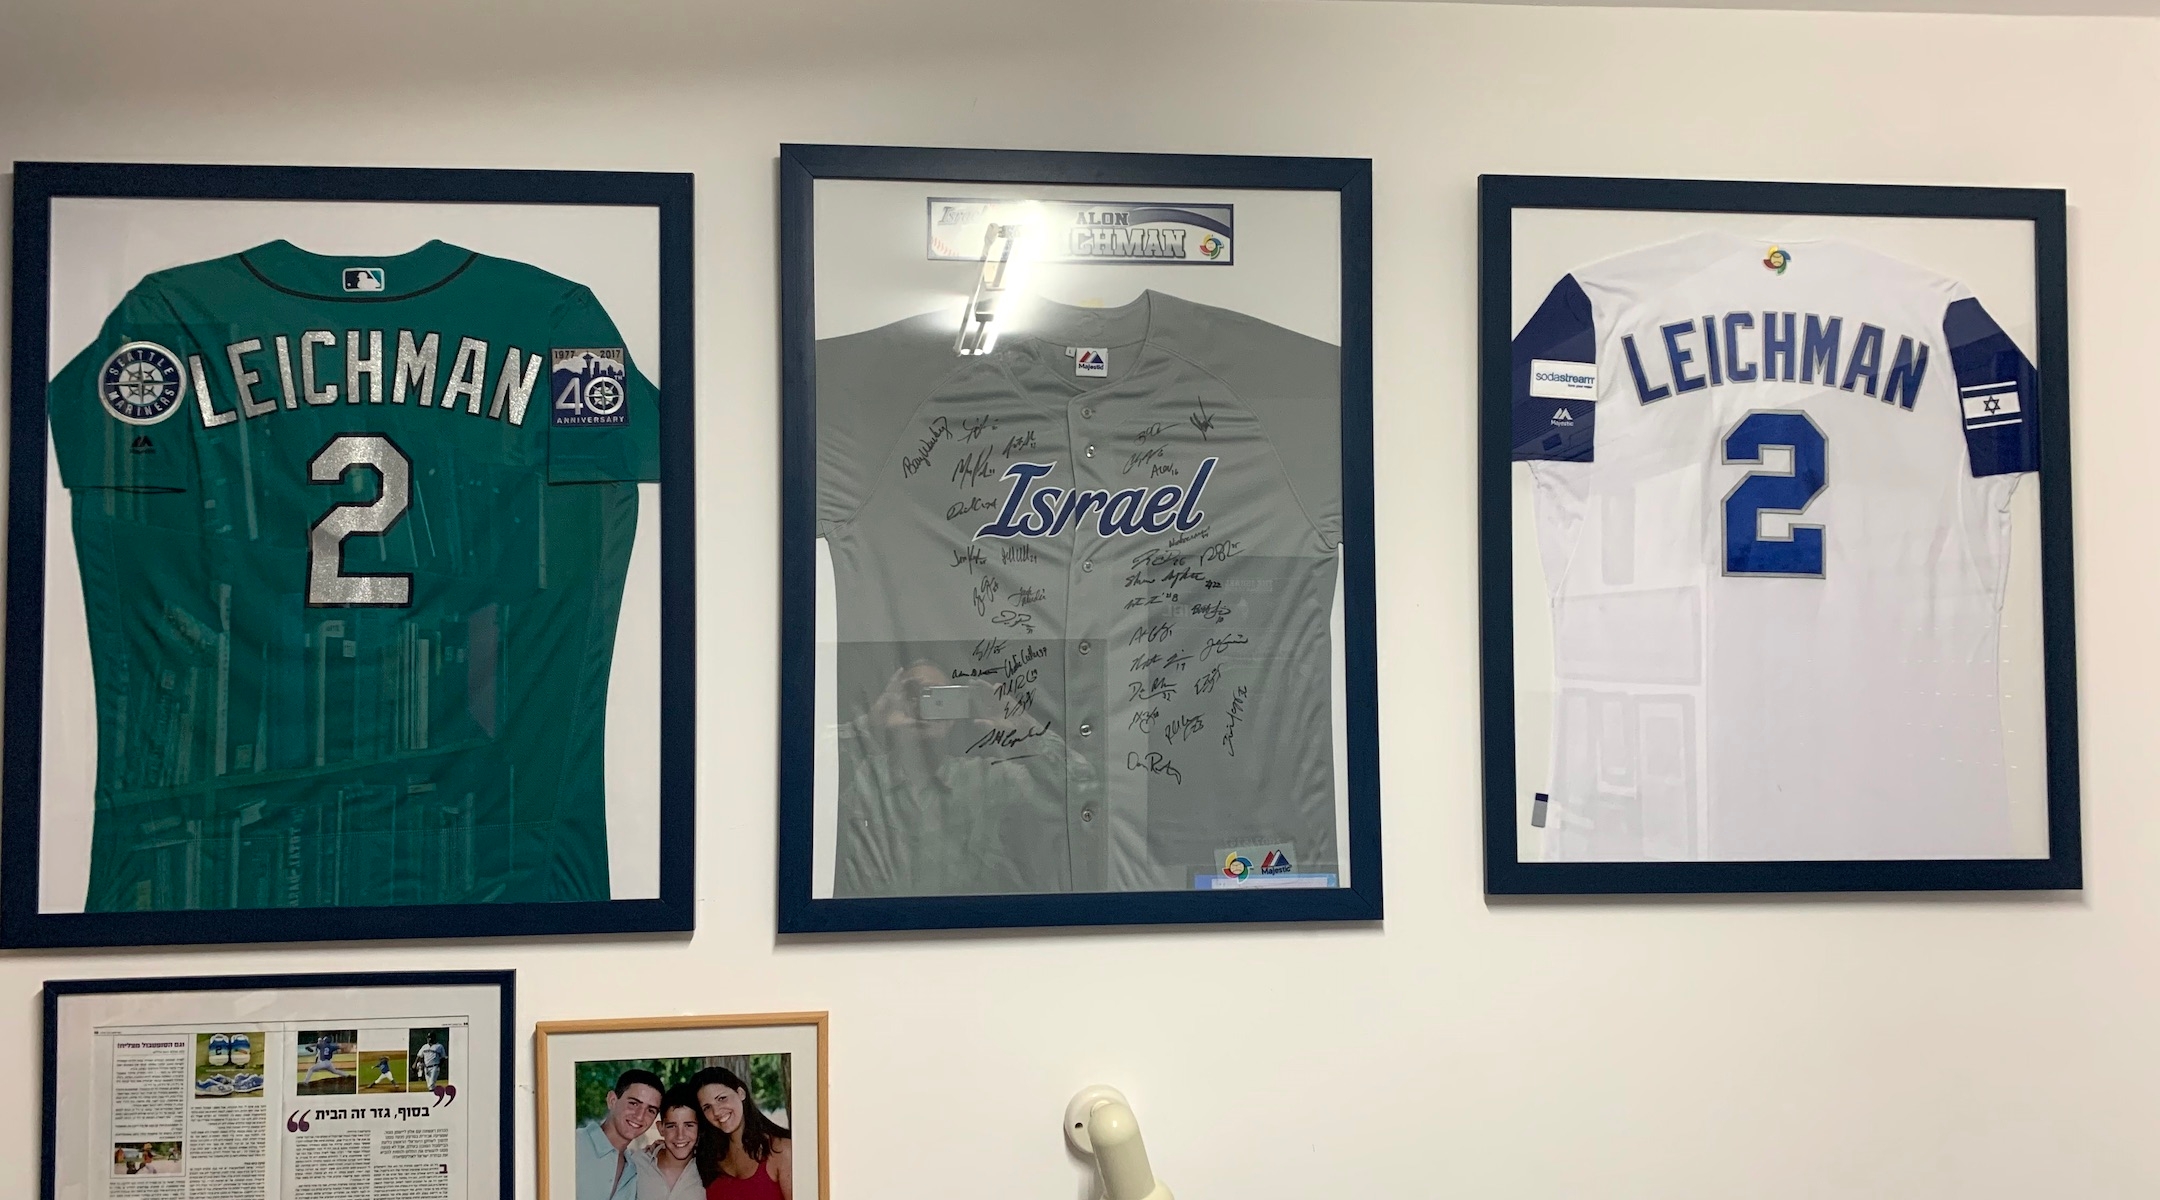 Various jerseys from Alon Leichman’s baseball career are displayed on the wall of his family’s home at Kibbutz Gezer, Israel. (Elli Wohlgelernter)